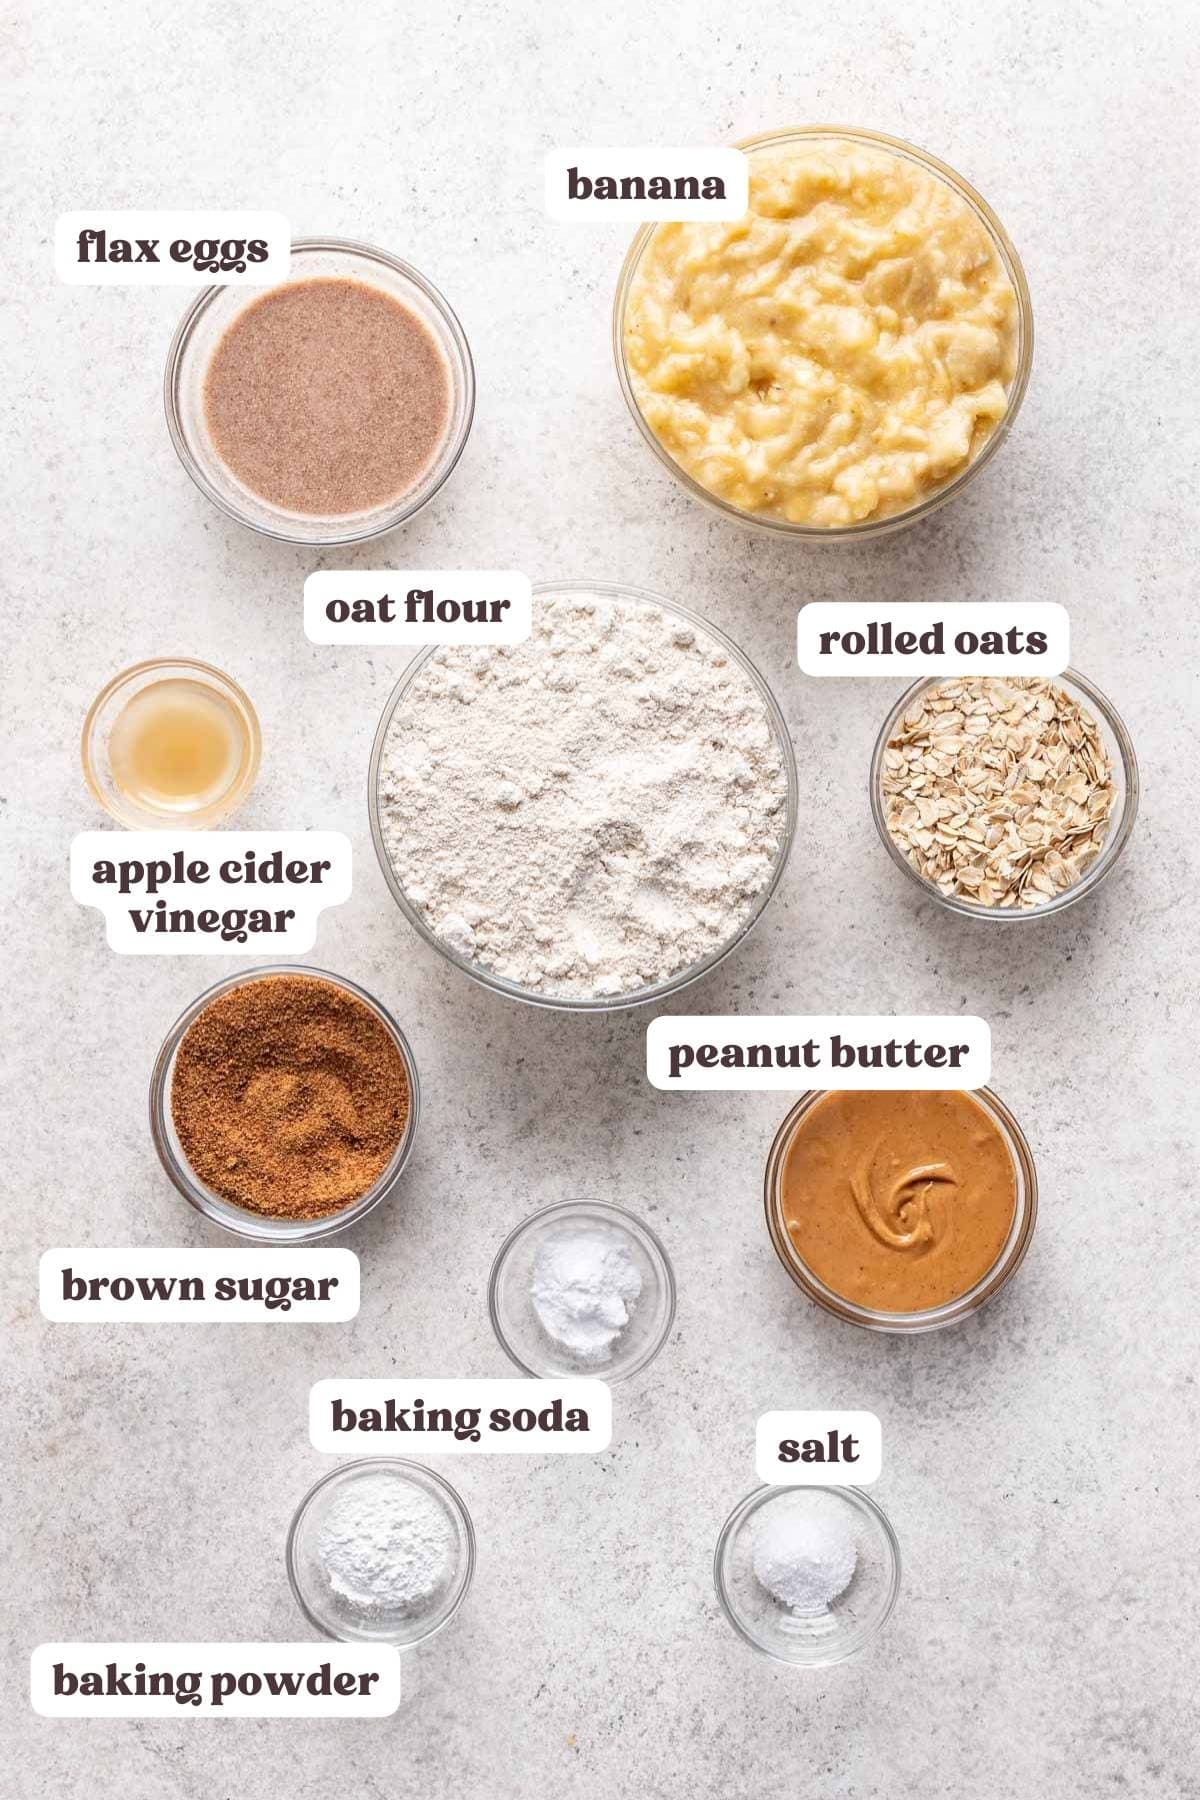 Overview of ingredients you need to make these peanut butter banana oatmeal muffins. Ingredients measured in glass bowls.